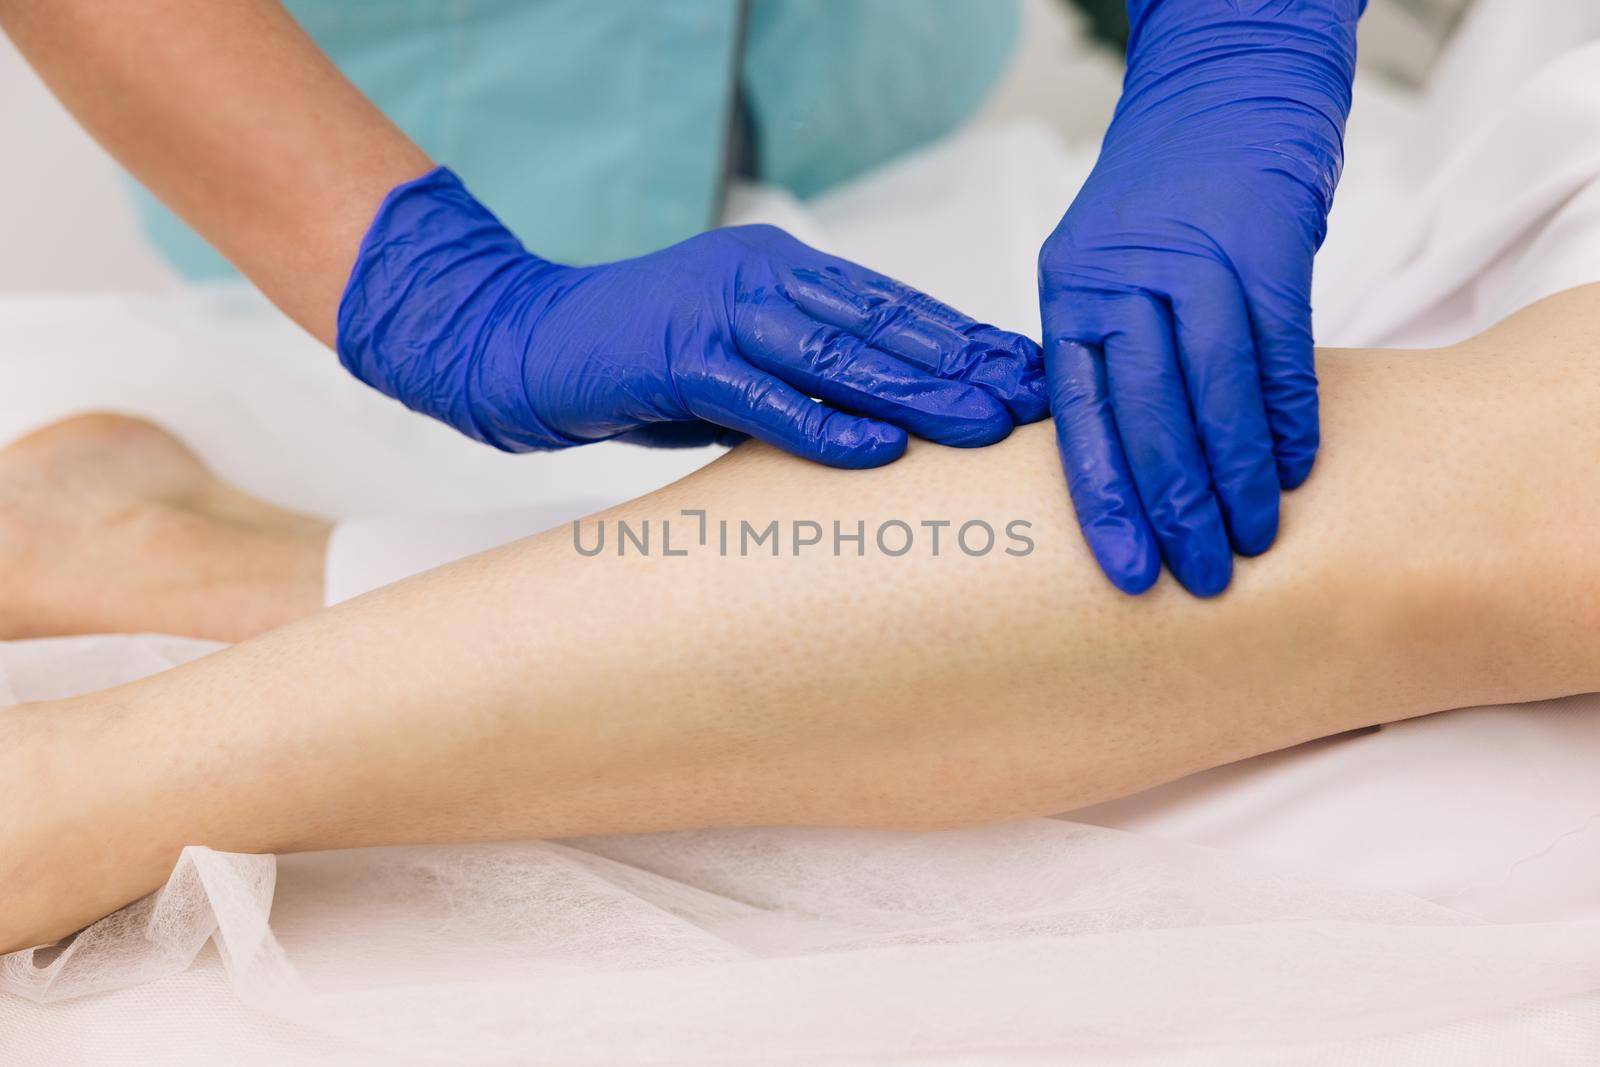 Doctor in gloves examining painful knee of female patient leg trauma. Healthcare medical insurance concept. Physiotherapist worker woman assisting physical medical exercise recovery after injuries.